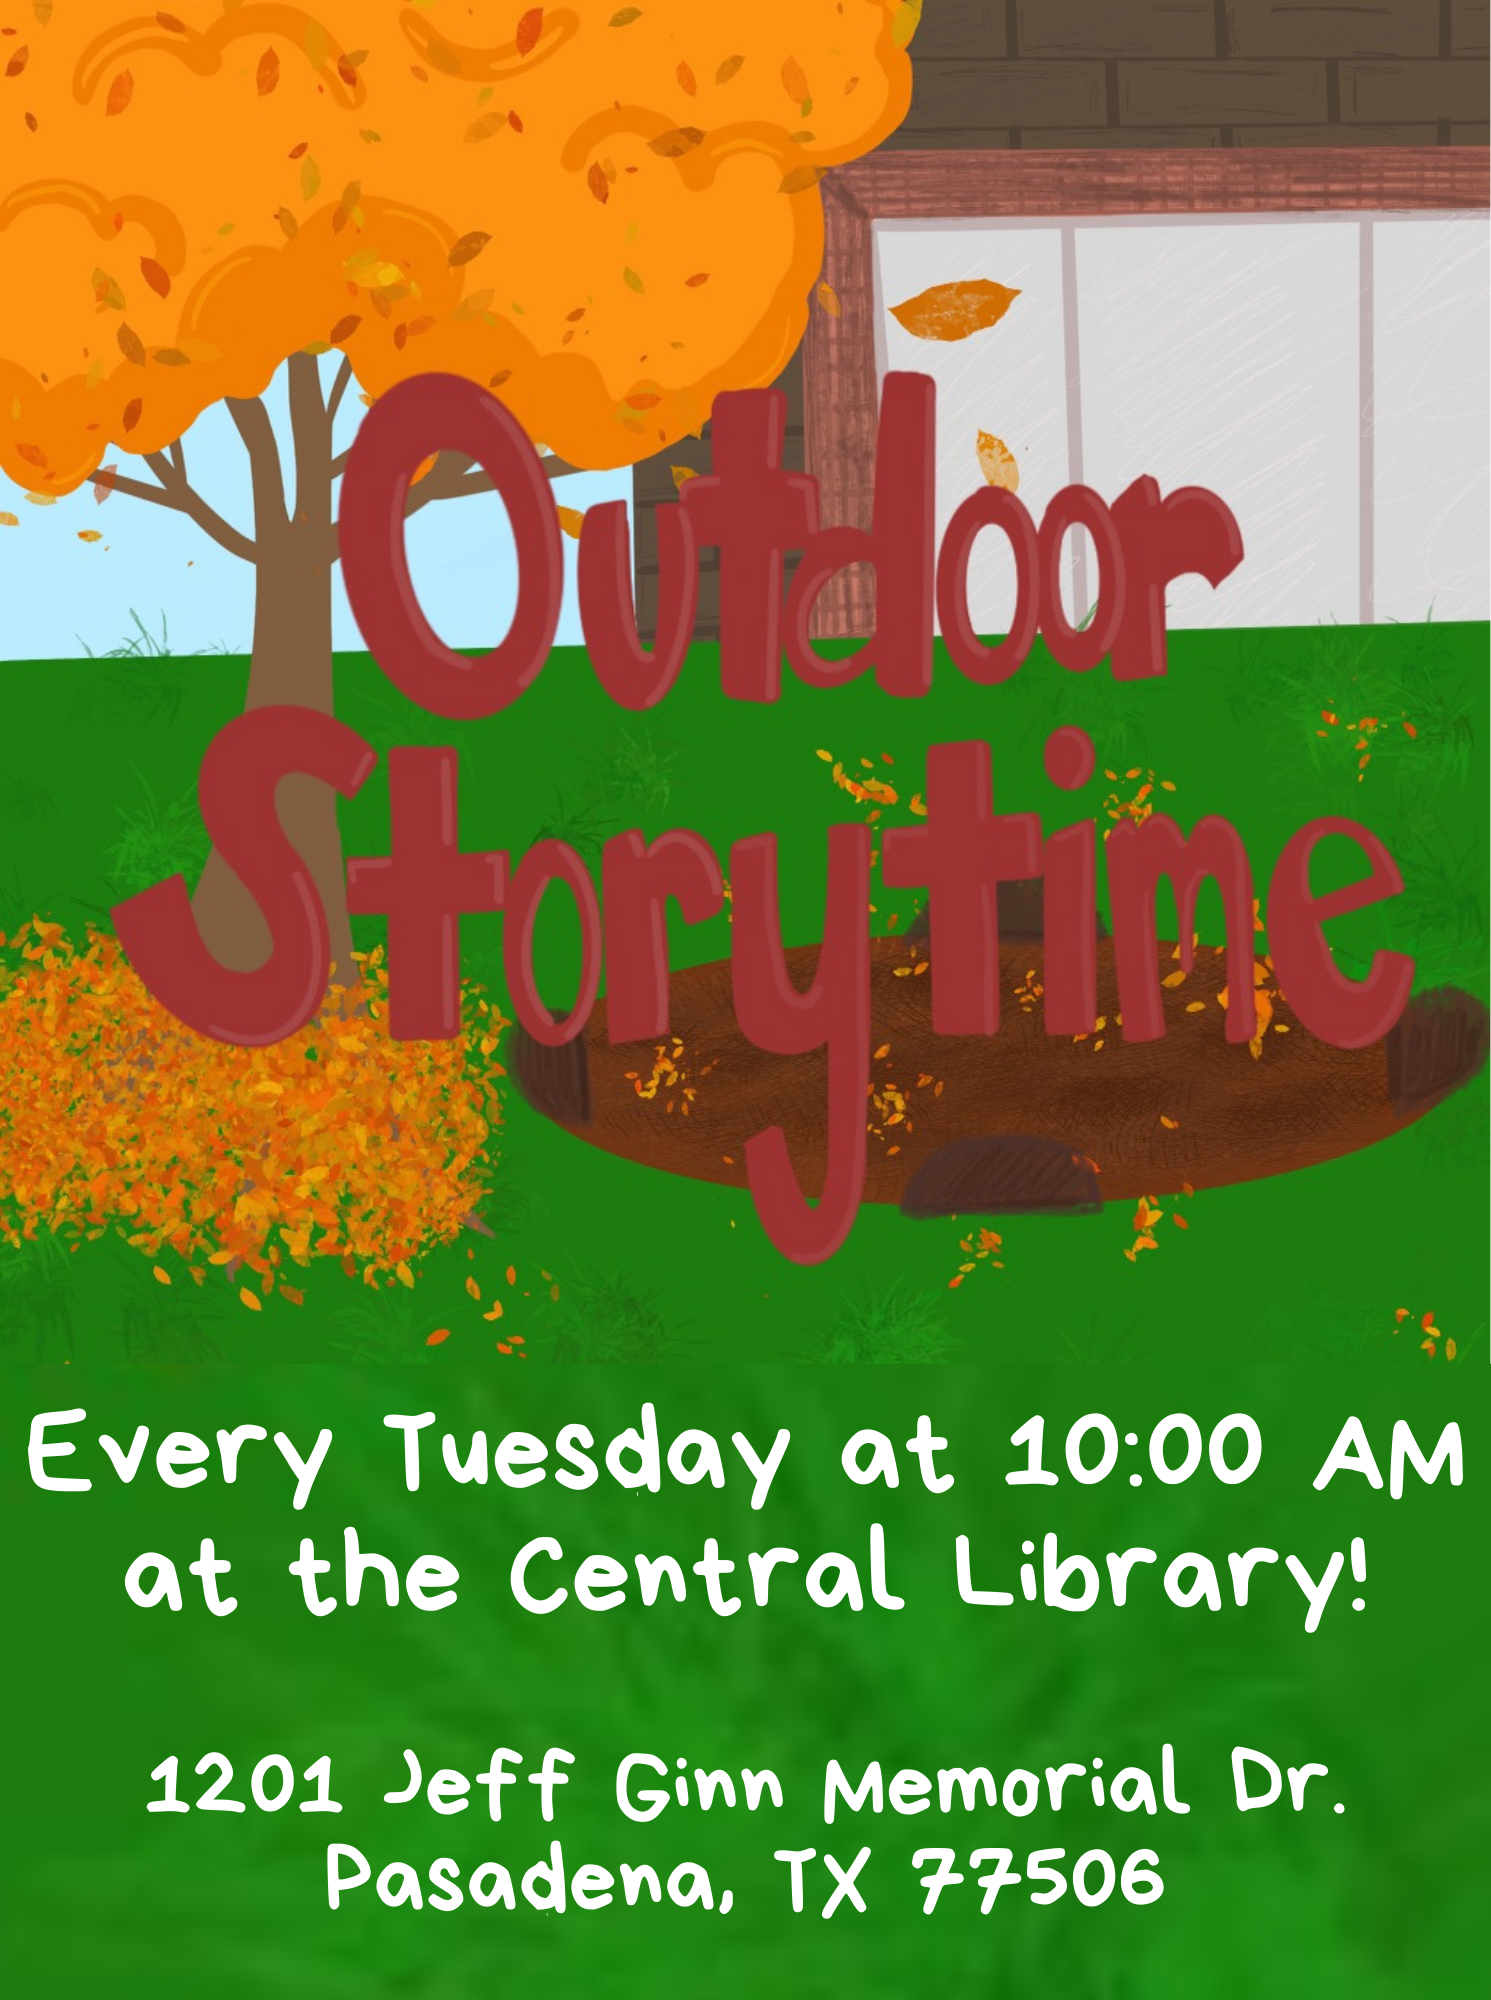 OIN US FOR OUTDOOR STORYTIME!  ﻿ Outdoor Storytime will be available every Tuesday, at 10:00 AM at the Central Library (1201 Jeff Ginn).